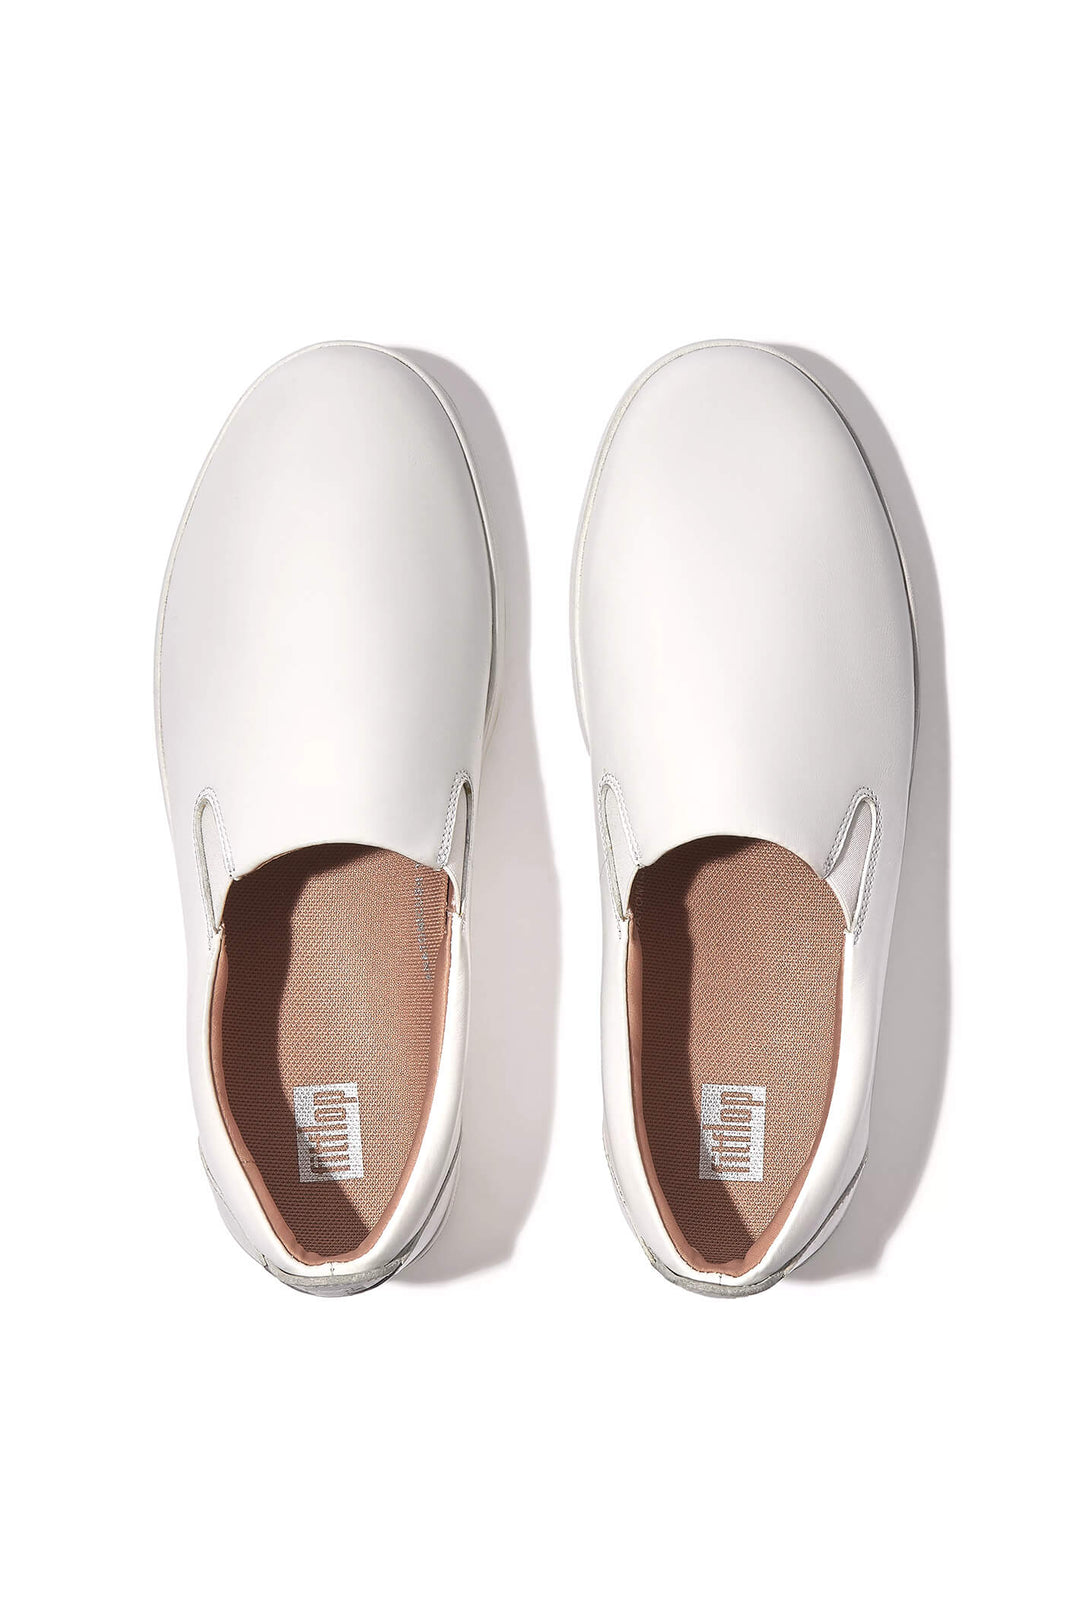 Fitflop Rally FC7-194 Leather Slip-On Skate Urban White Trainer - Shirley Allum Boutique